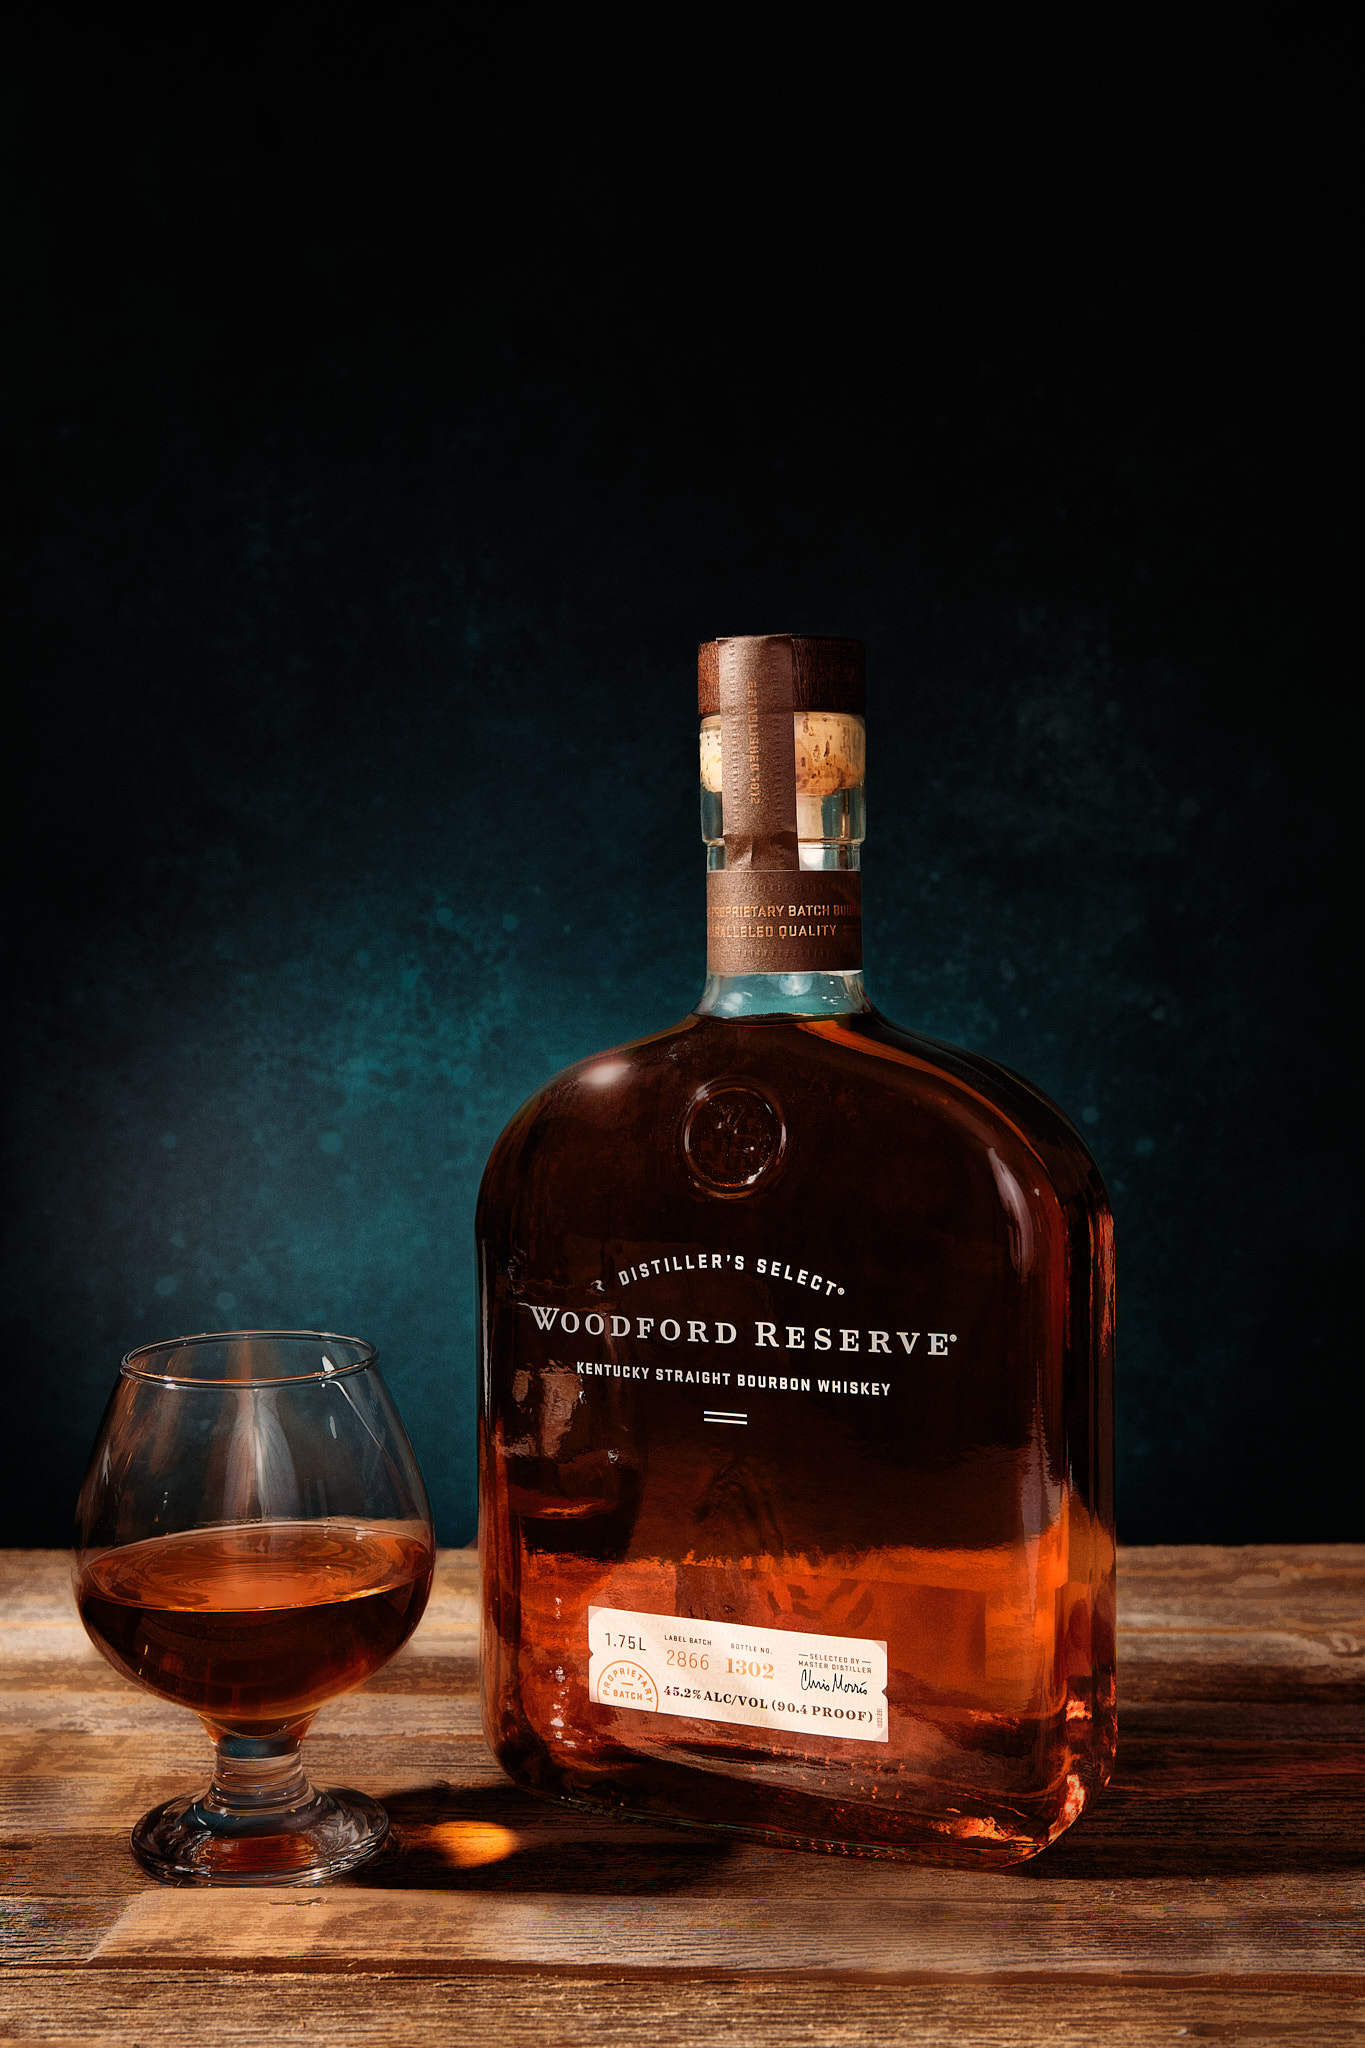 Bottle of Woodford Reserve Kentucky Straight Bourbon Whiskey with a glass of bourbon on a wooden table.